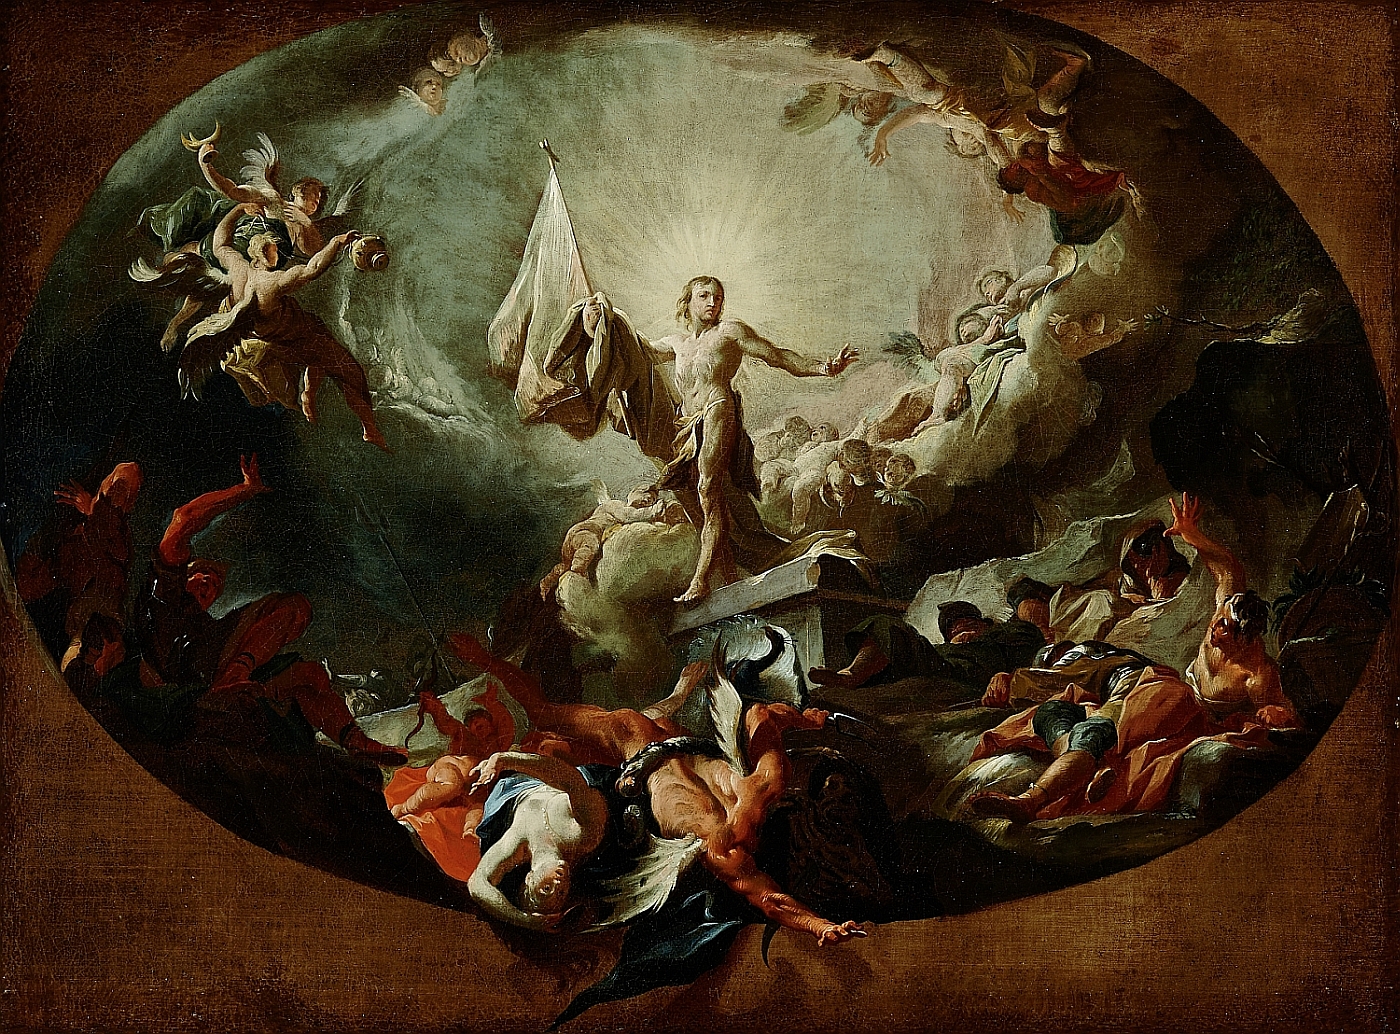 Christ’s Resurrection and Victory over Death and Hell, Paul Troger, ca. 1745, oil on canvas, inv. no. RO 0036; probably model for the lost fresco in the cemetery church of St. Niklas in Vienna